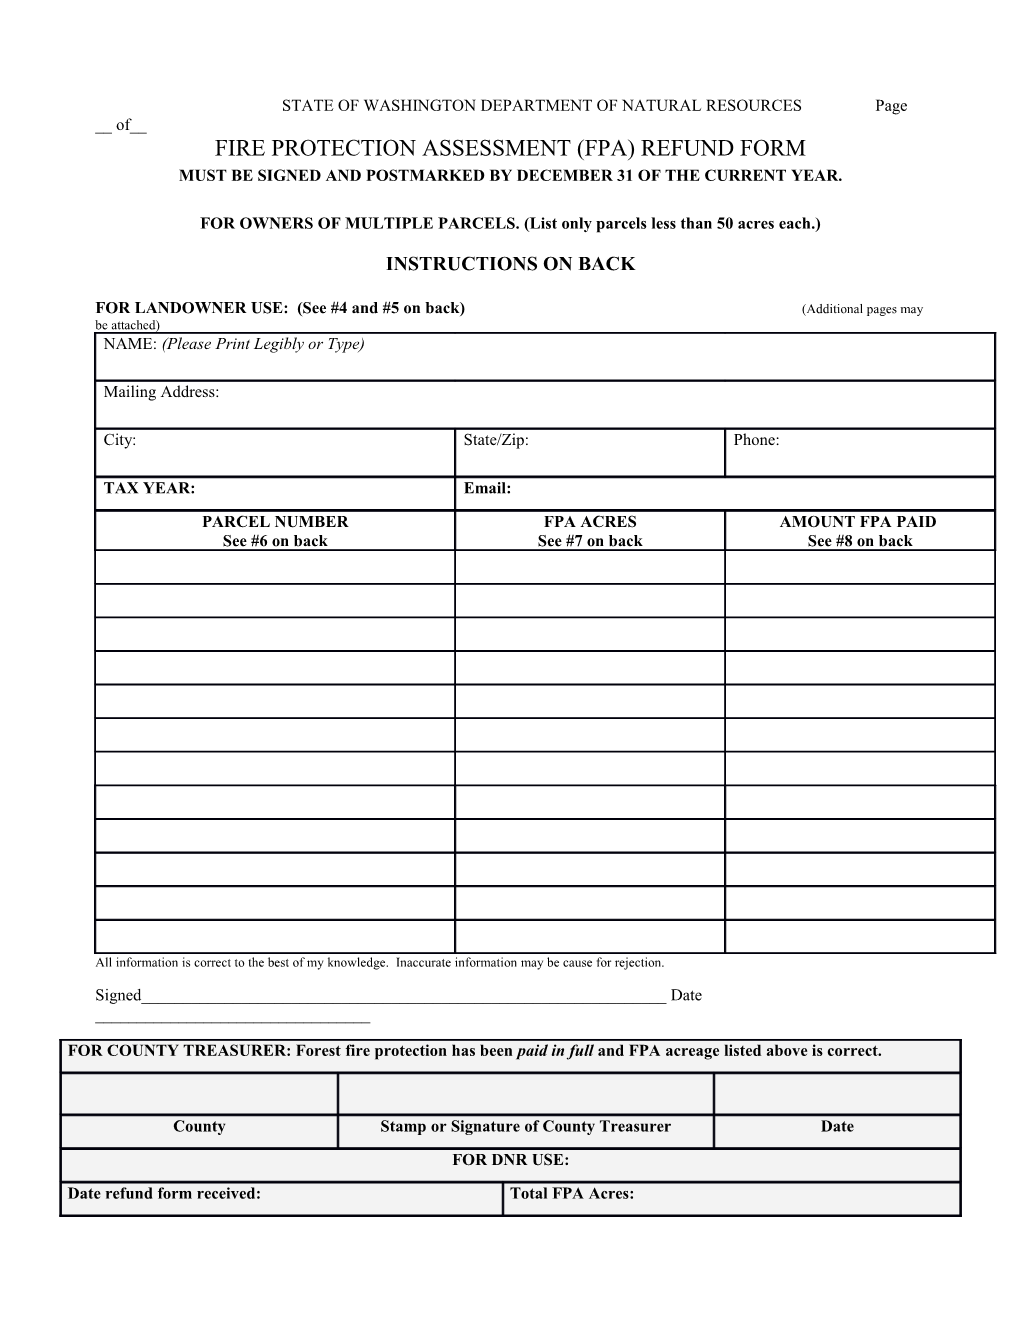 Fire Protection Assessment (FPA) Refund Form